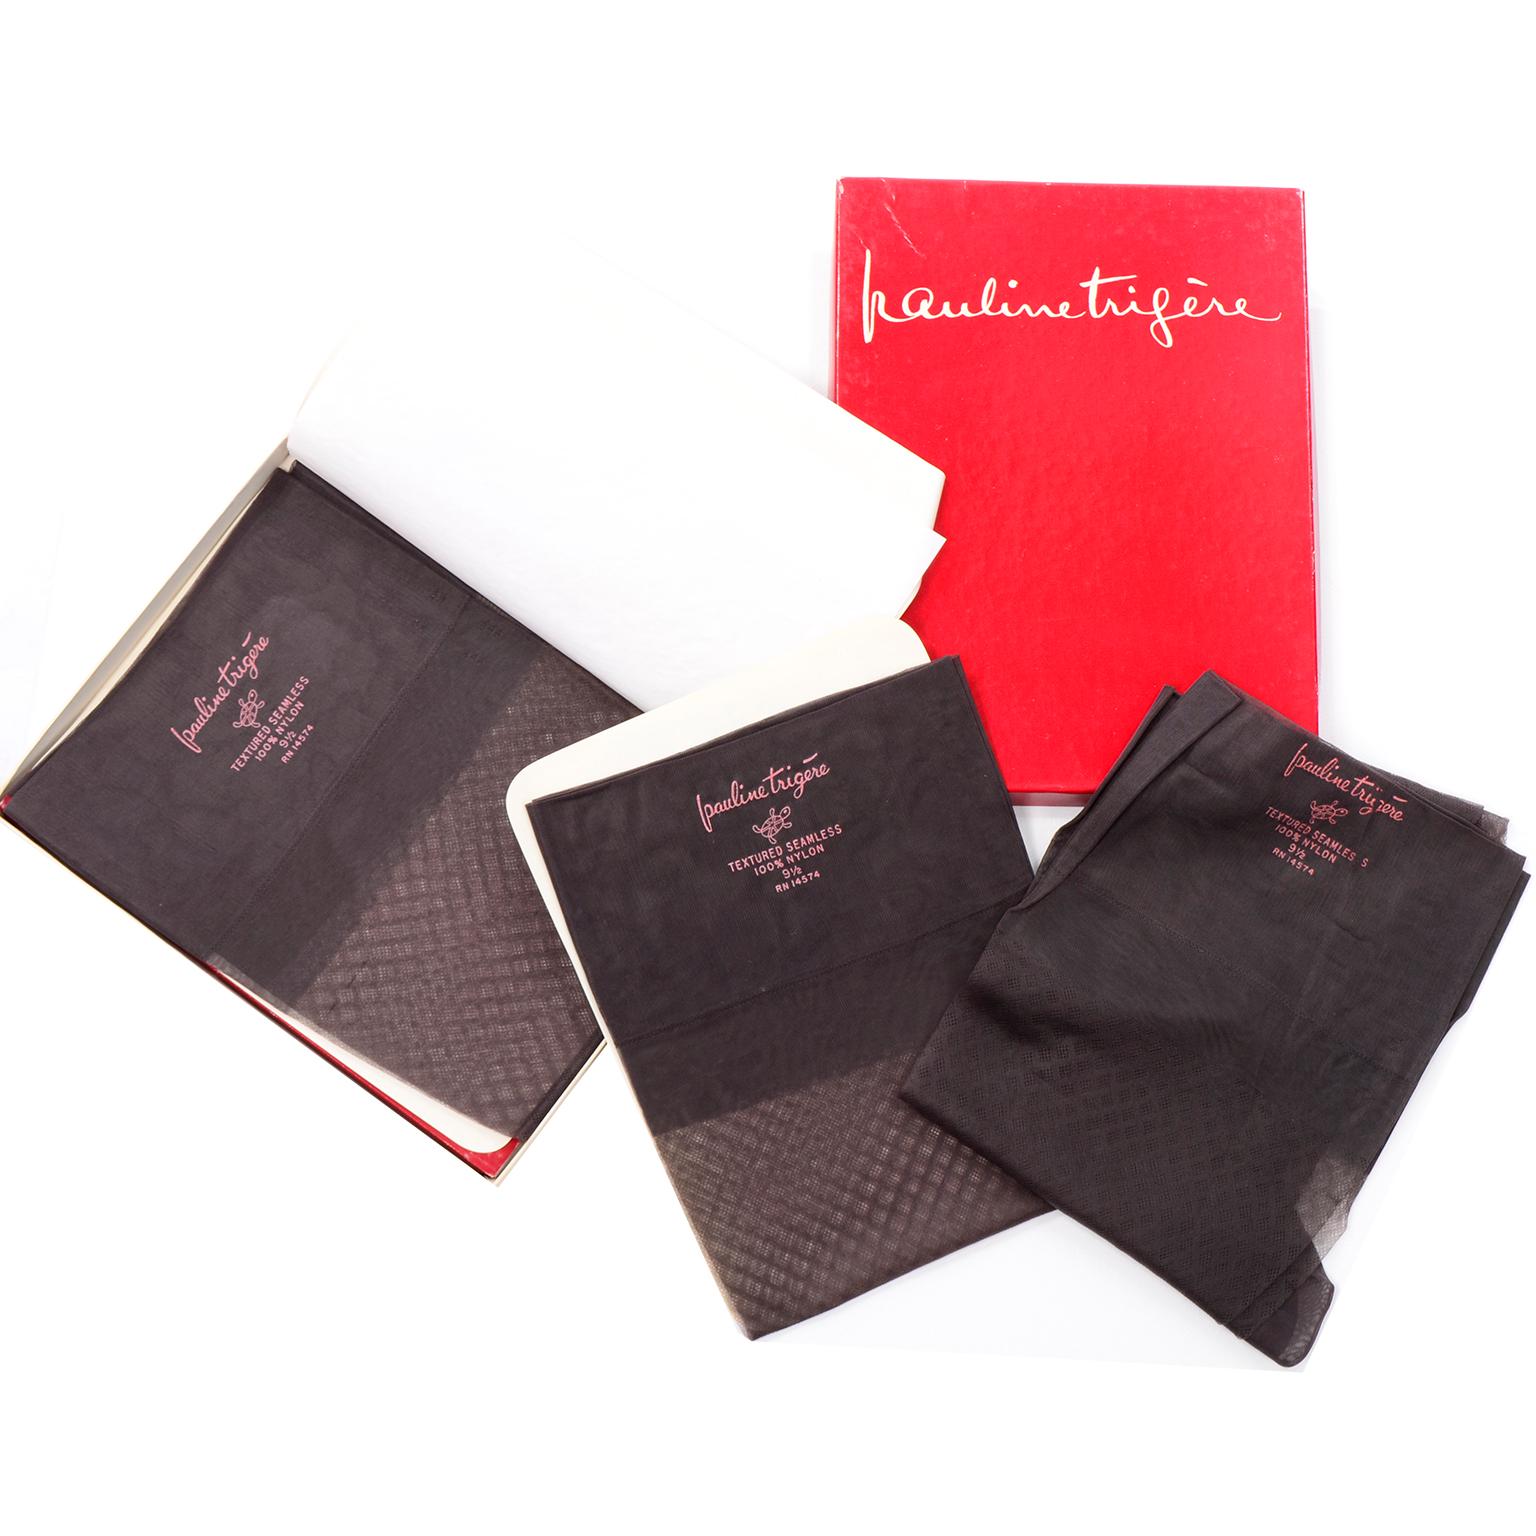 These rare mid century vintage stockings from Pauline Trigere are unworn and still in their original red Pauline Trigere box.  This group of  1950's hosiery includes 3 pair of textured nylon stockings and they are labeled a size 9 and 1/2.  Such a